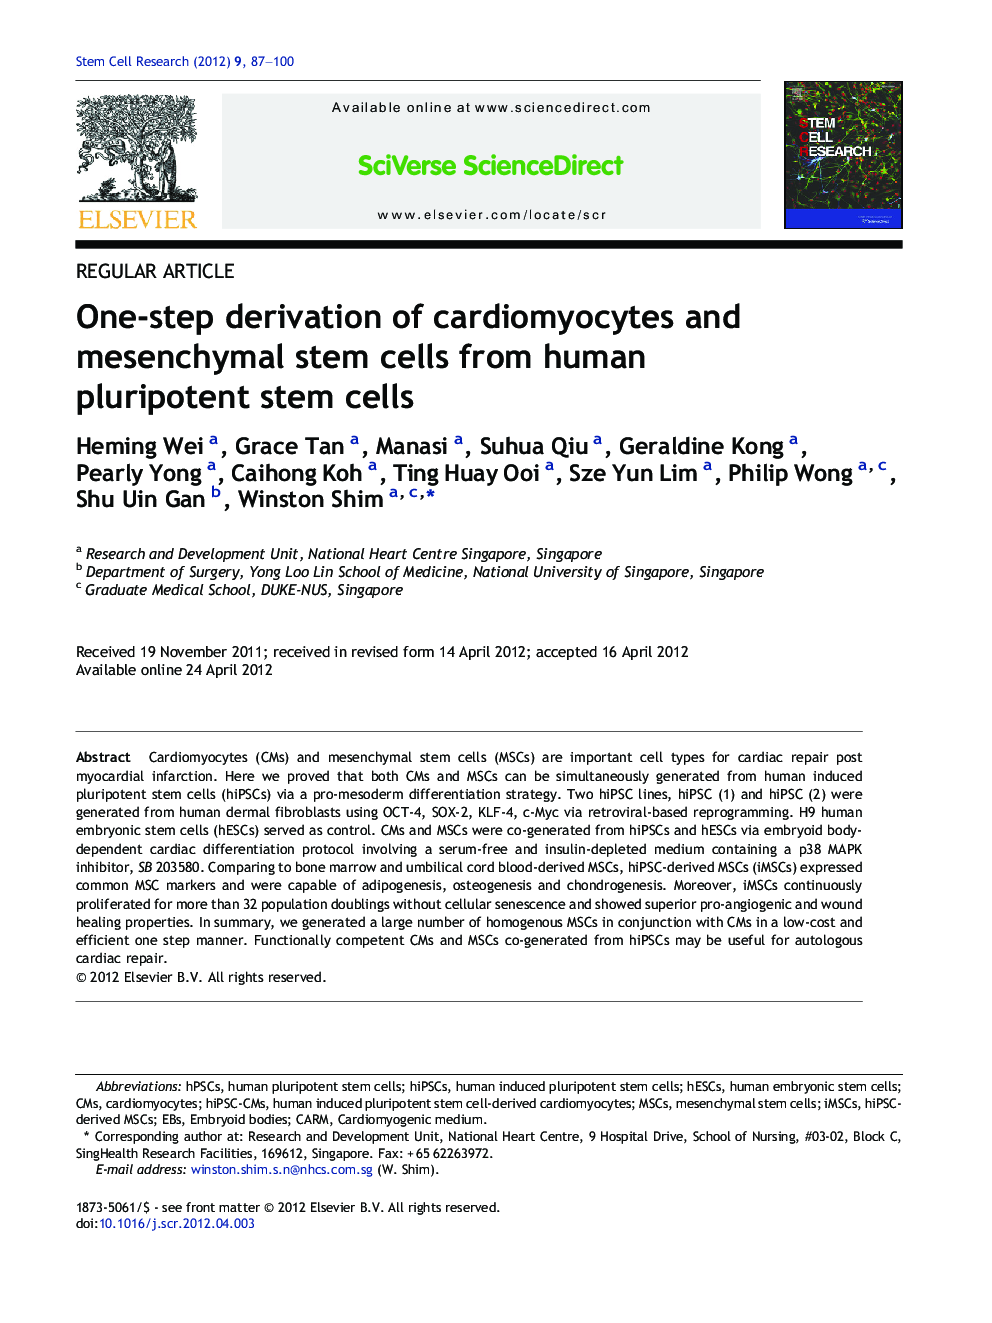 One-step derivation of cardiomyocytes and mesenchymal stem cells from human pluripotent stem cells